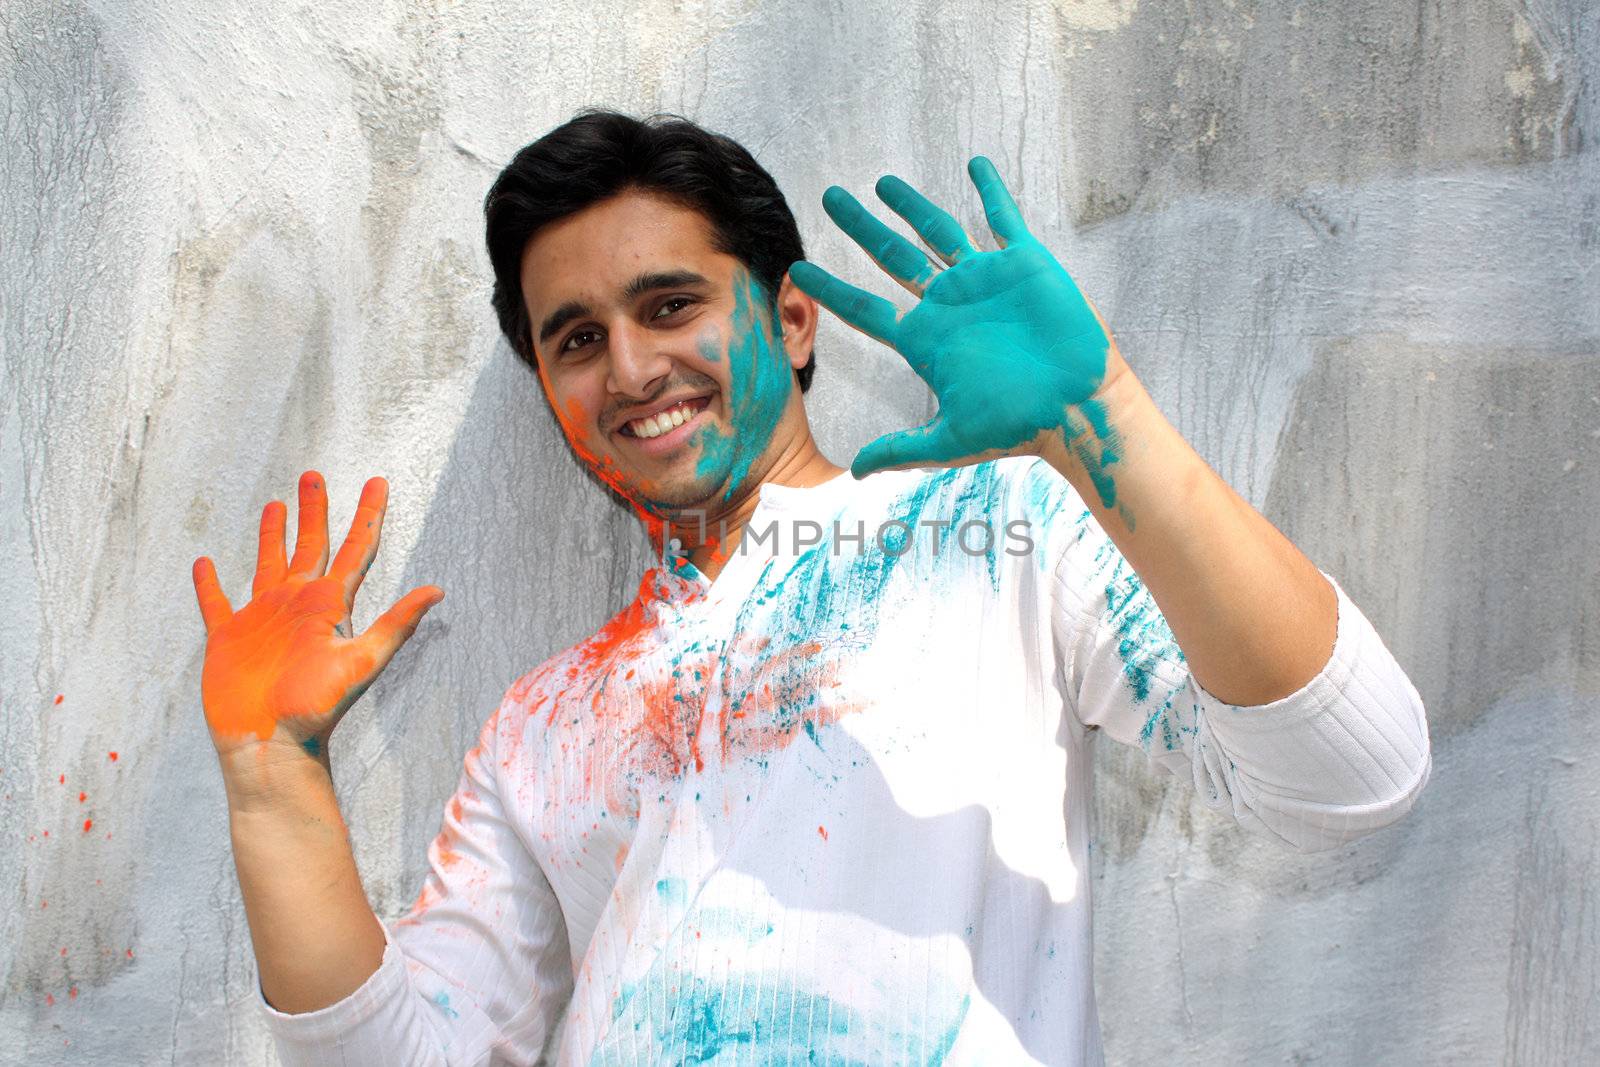 A young Indian guy happy during the festival of colors - Holi.